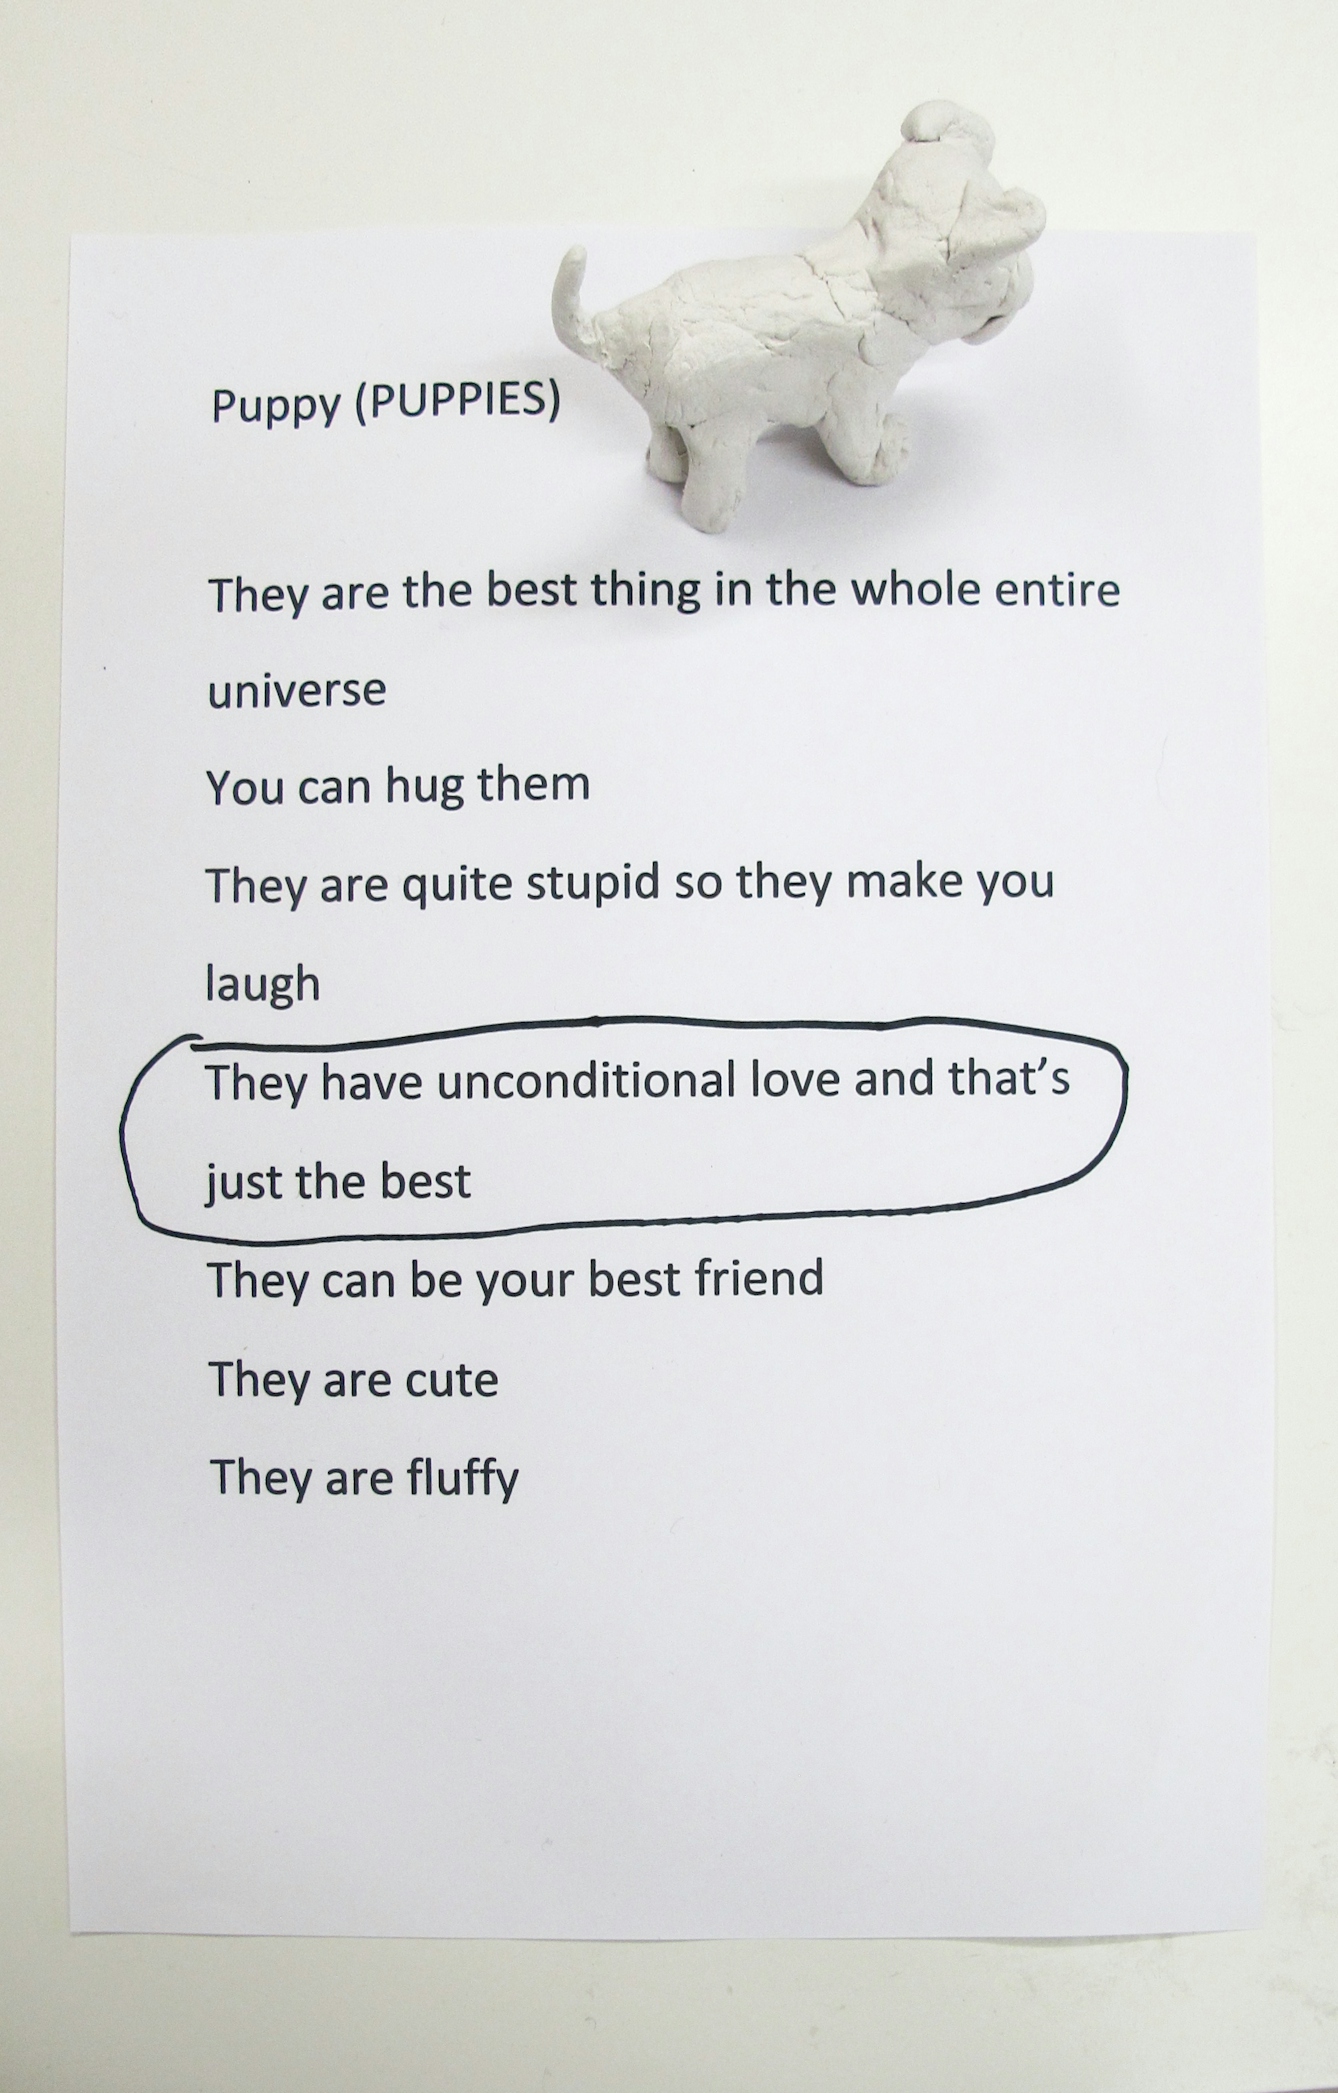 A photograph showing a piece of A4 white paper on a table with the heading Puppy (Puppies) typed in black, as well as a small well formed white clay puppy standing in the top right corner facing out of frame. Below the heading, a list reads: They are the best thing in the whole entire universe; You can hug them; They are quite stupid so they make you laugh; They have unconditional love and that’s just the best; They can be your best friend; They are cute; They are fluffy.  ‘They have unconditional love and that’s just the best’ is circled in black felt tip.